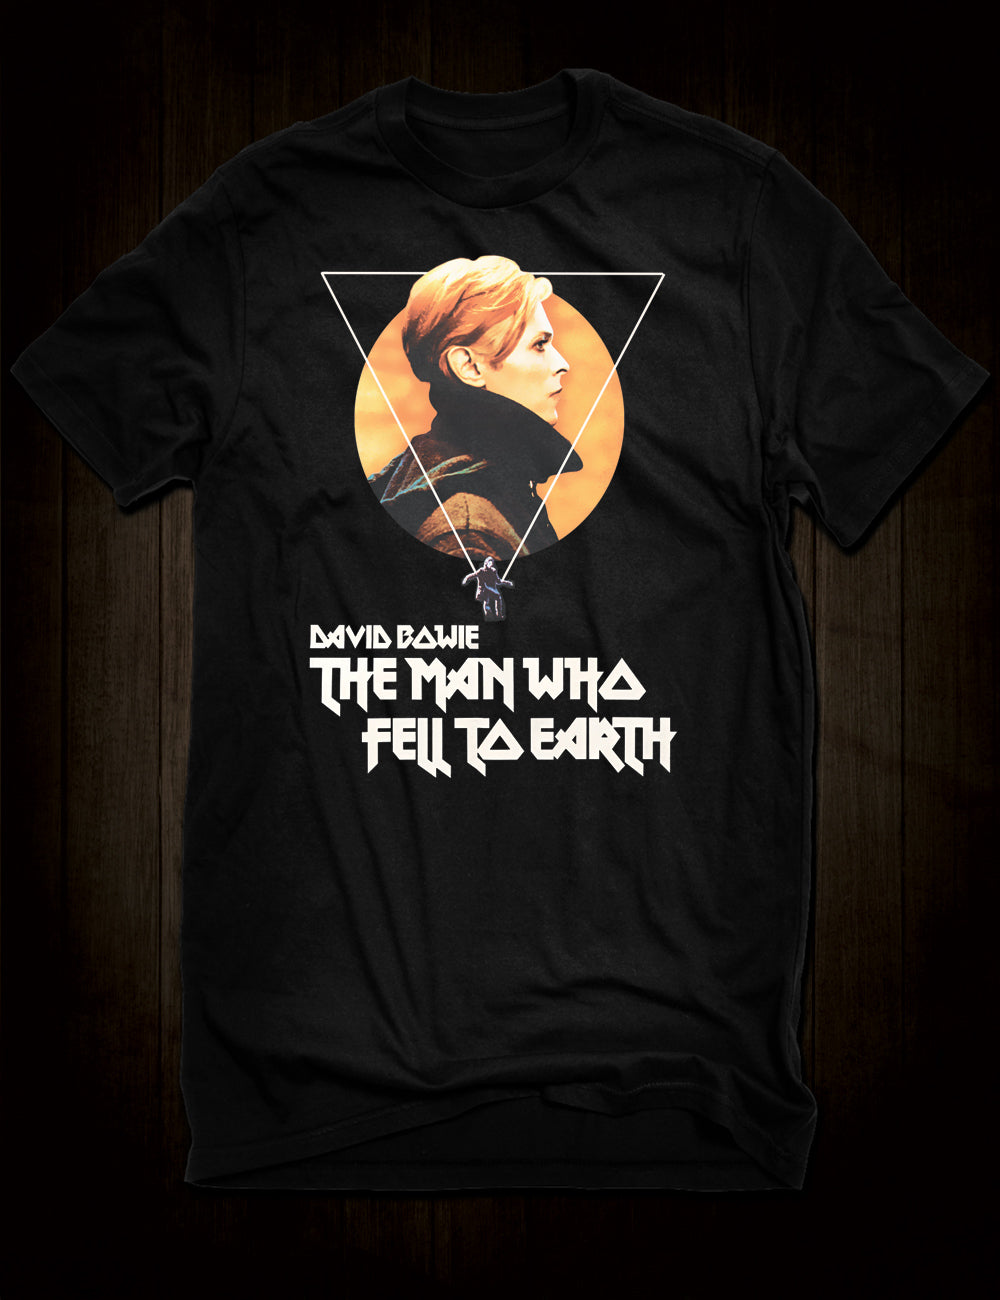 David Bowie The Man Who Fell To Earth T-Shirt